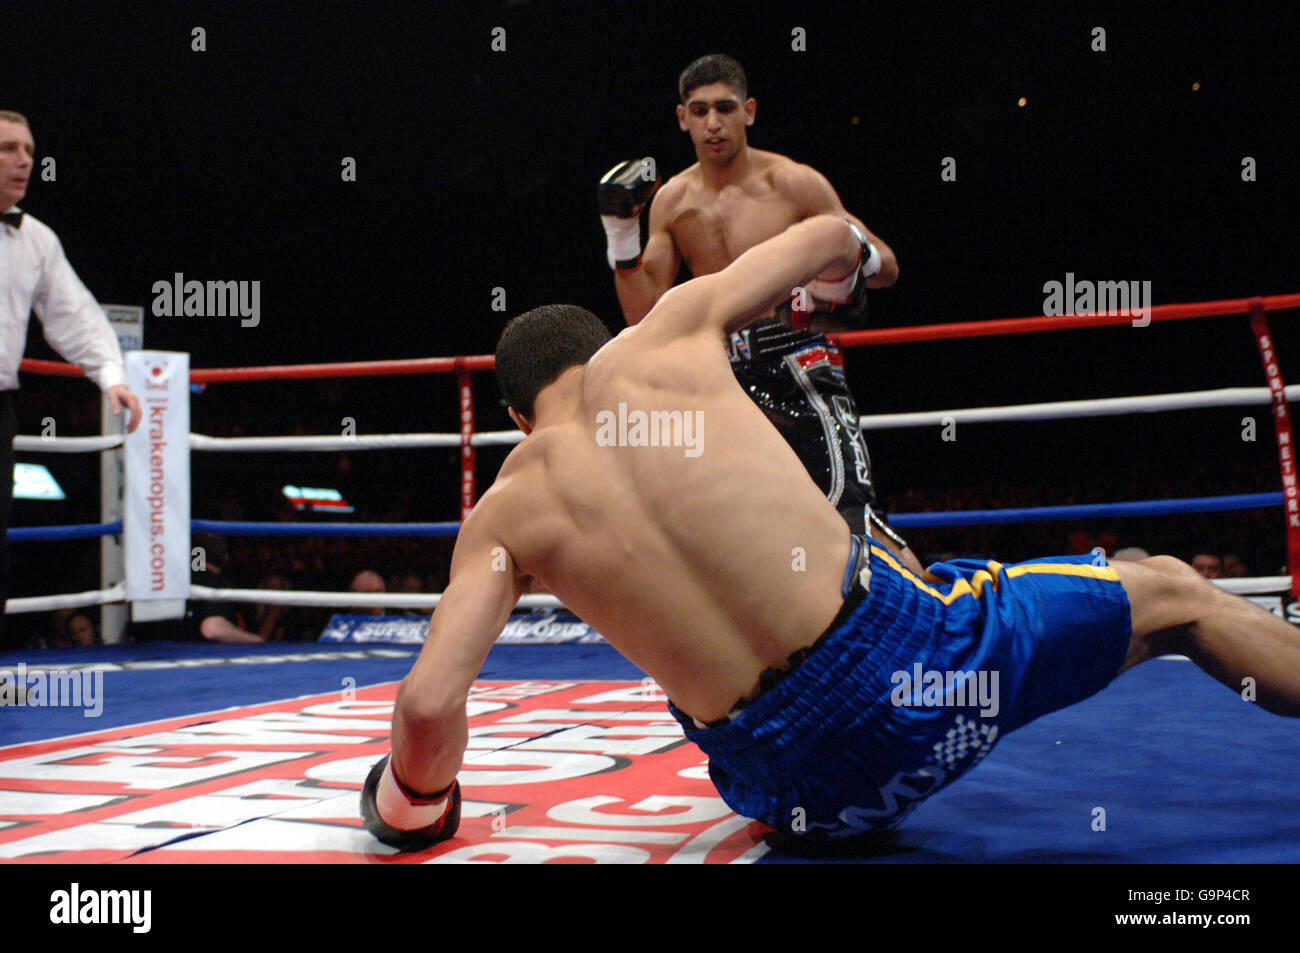 Bolton's Amir Khan knocks down France's Mohammed Medjani during the Light-Welterweight fight at the Wembley Arena, London. Stock Photo